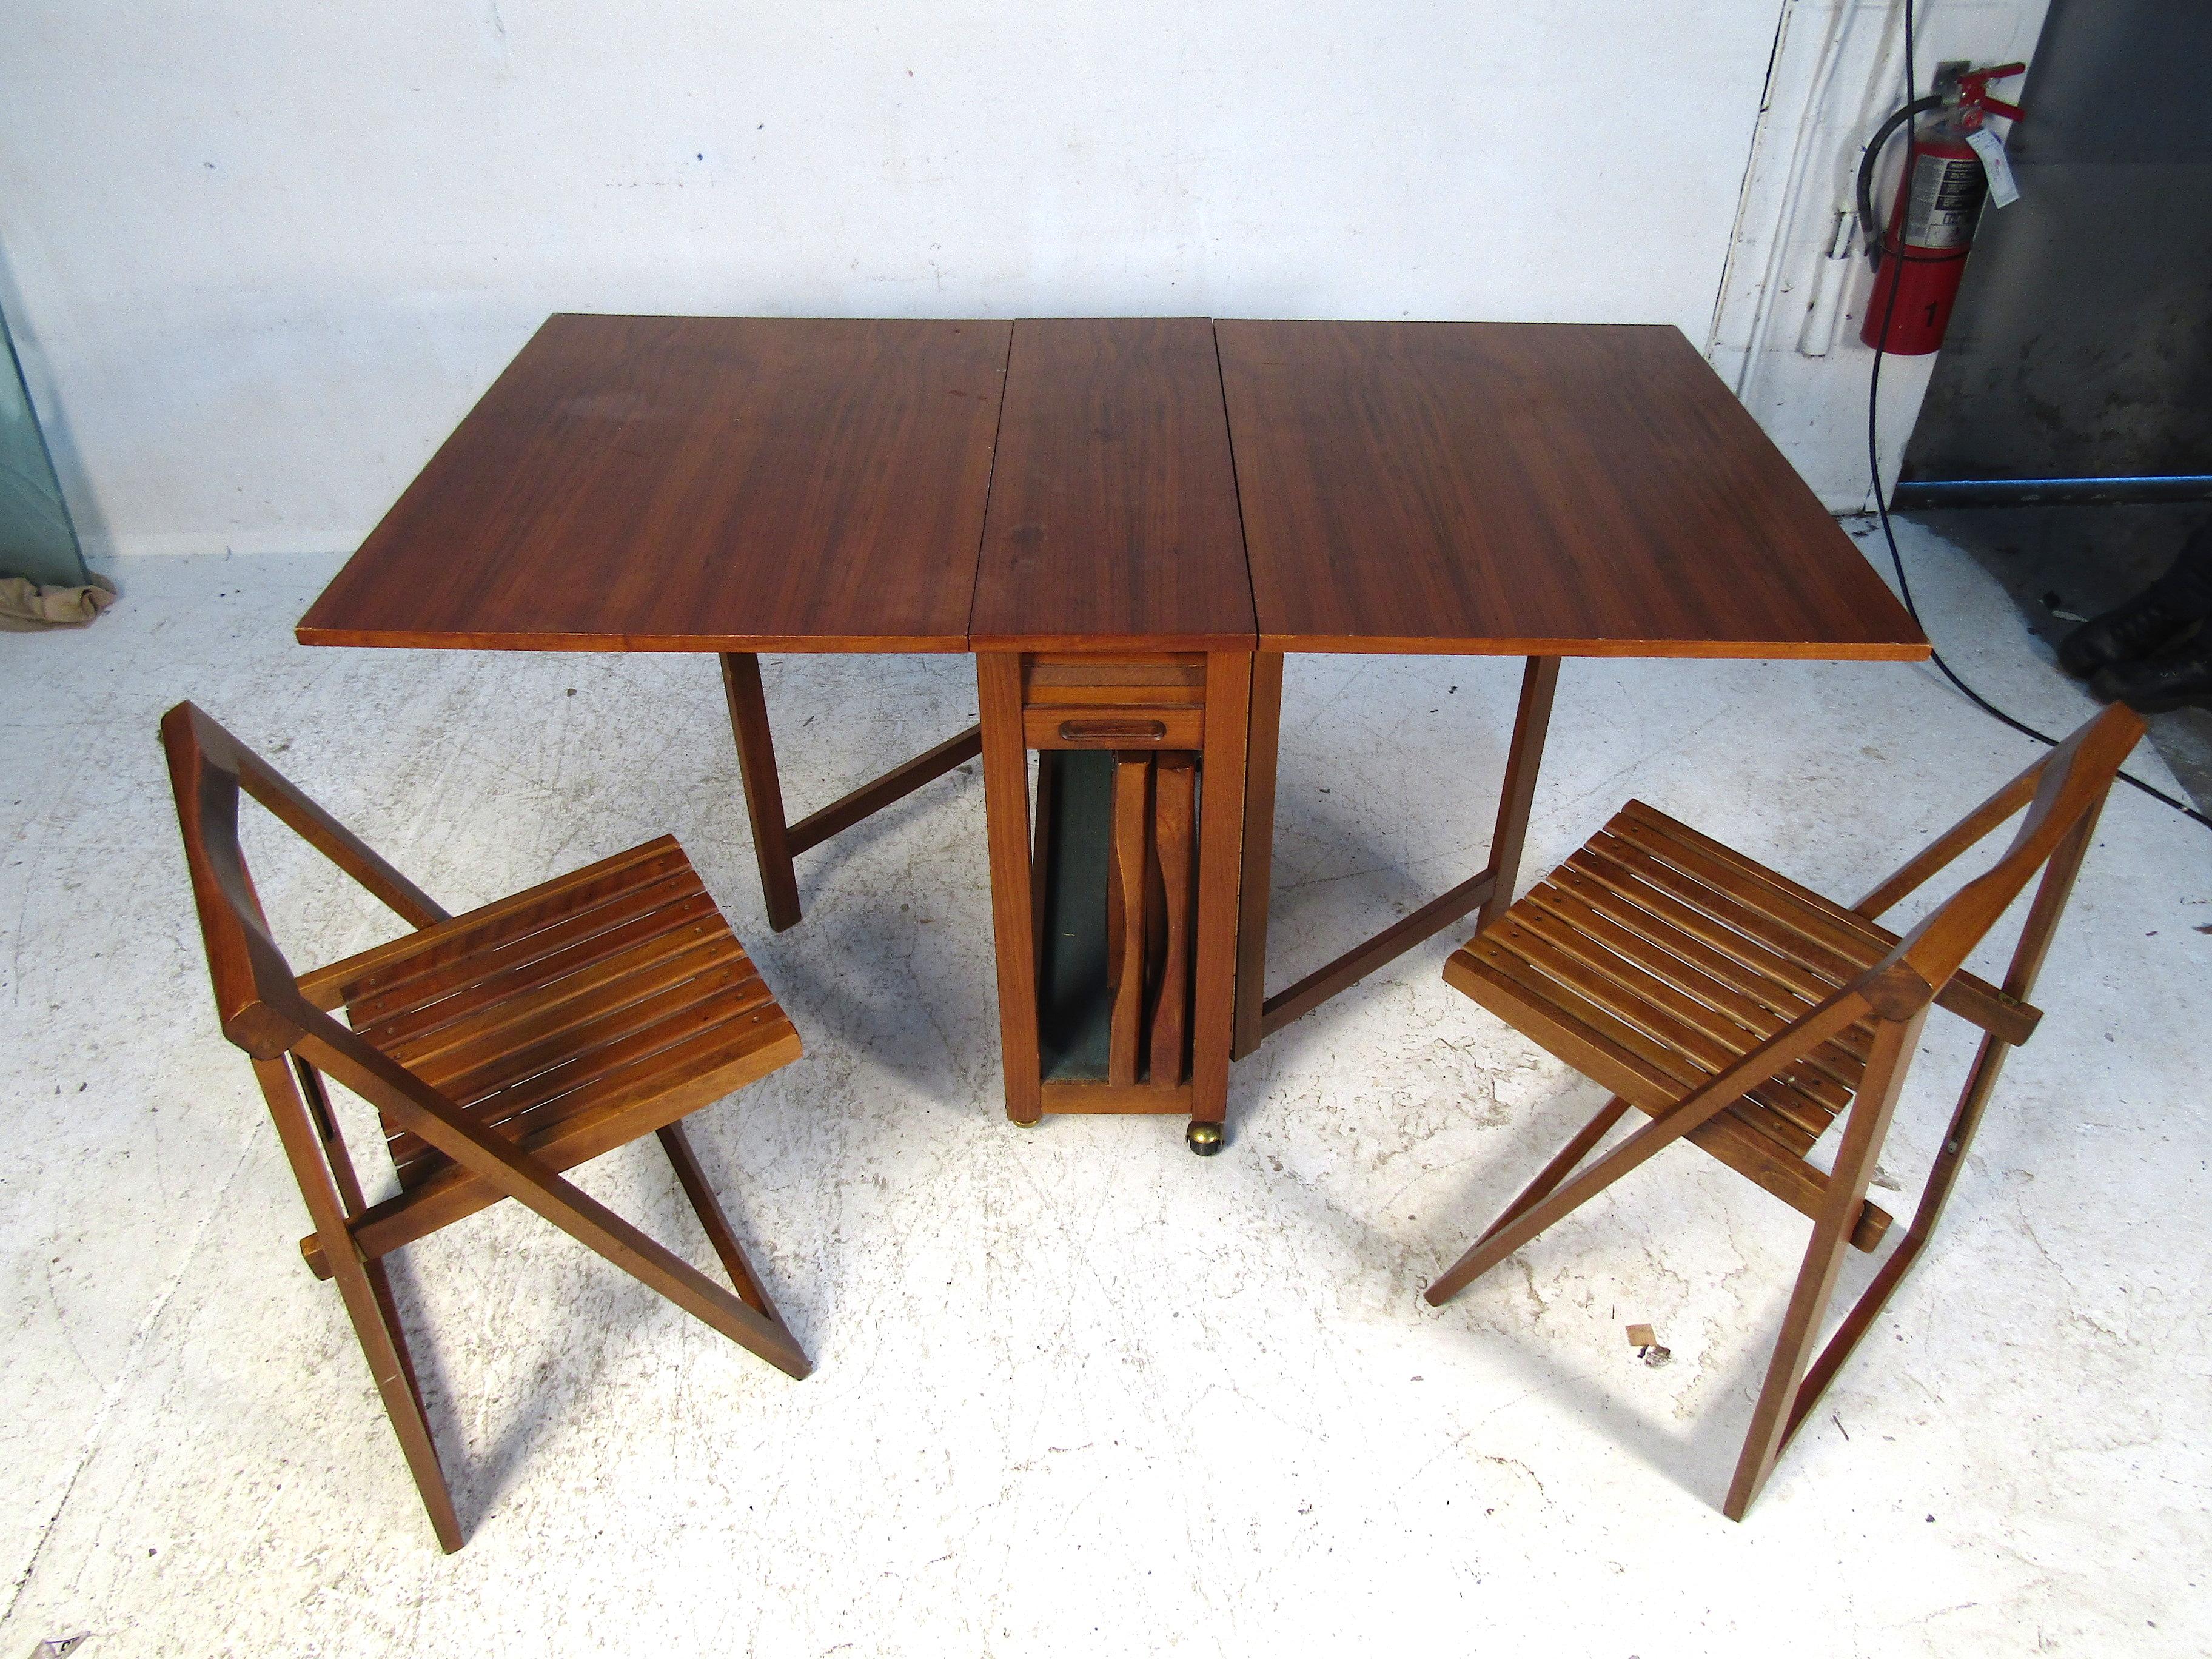 Midcentury Drop-Leaf Table with Storable Matching Chairs 3